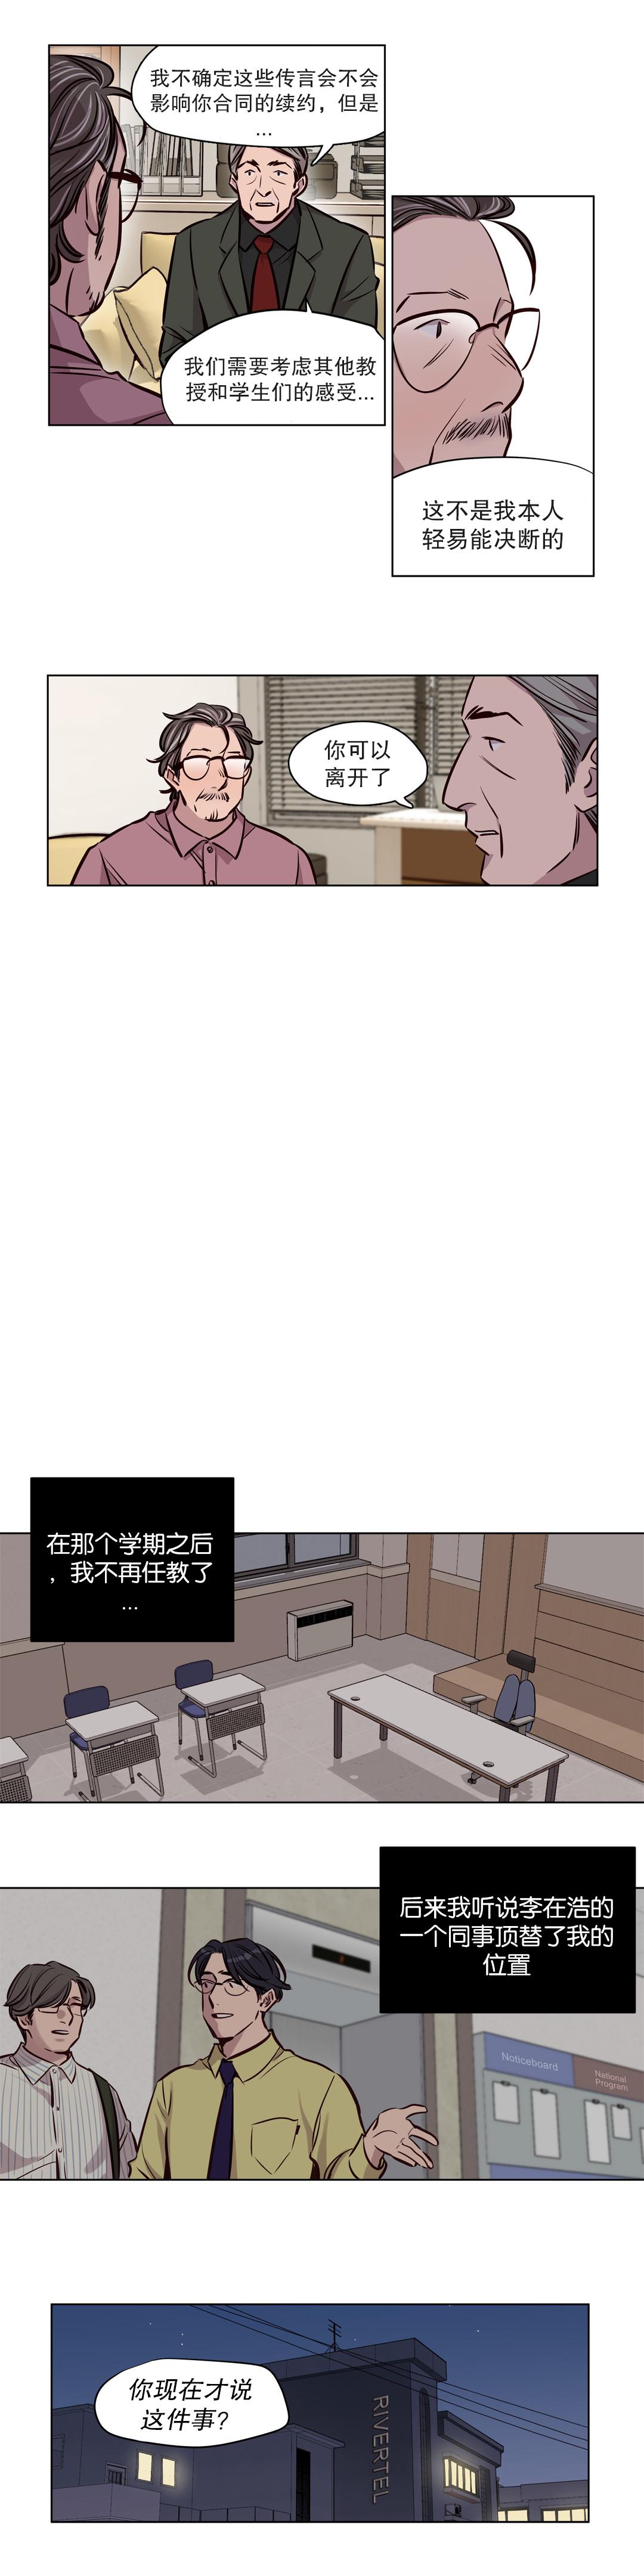 Ex Gf [Ramjak] 赎罪营(Atonement Camp) Ch.50-52 (Chinese) Freak - Page 5